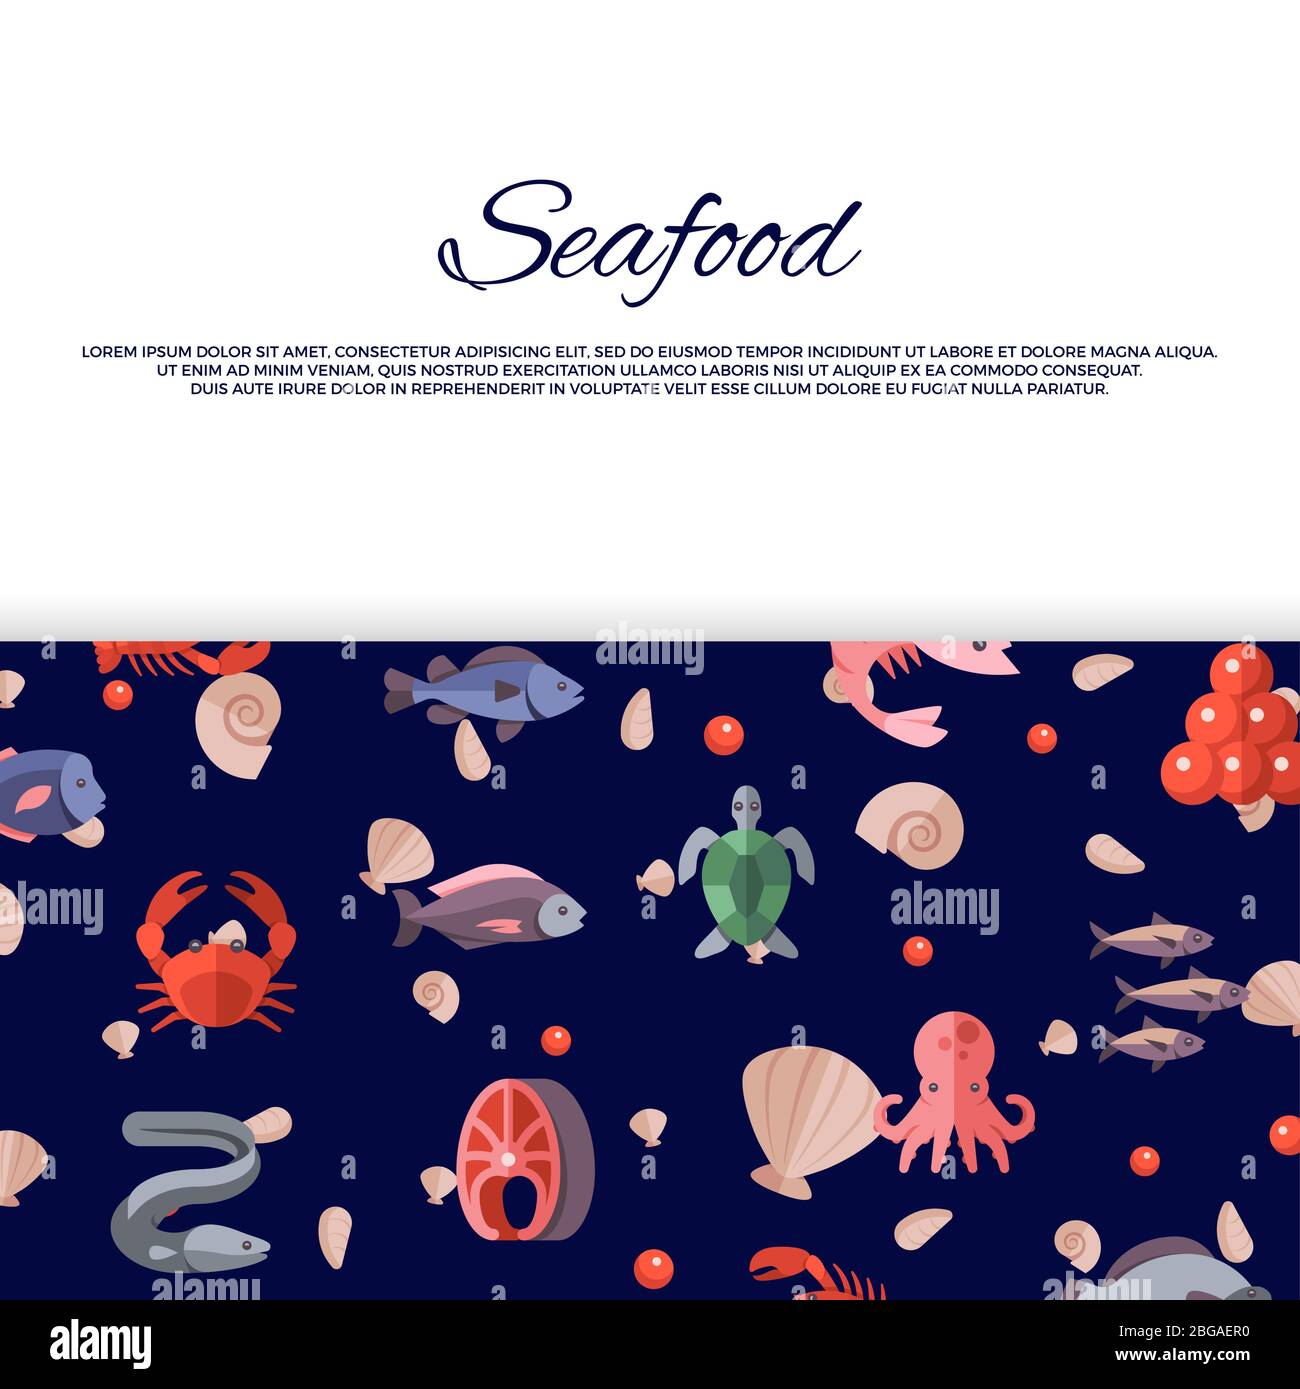 Seafood banner design with bright caviar, fishes, crabs, salmon. Vector illustration Stock Vector